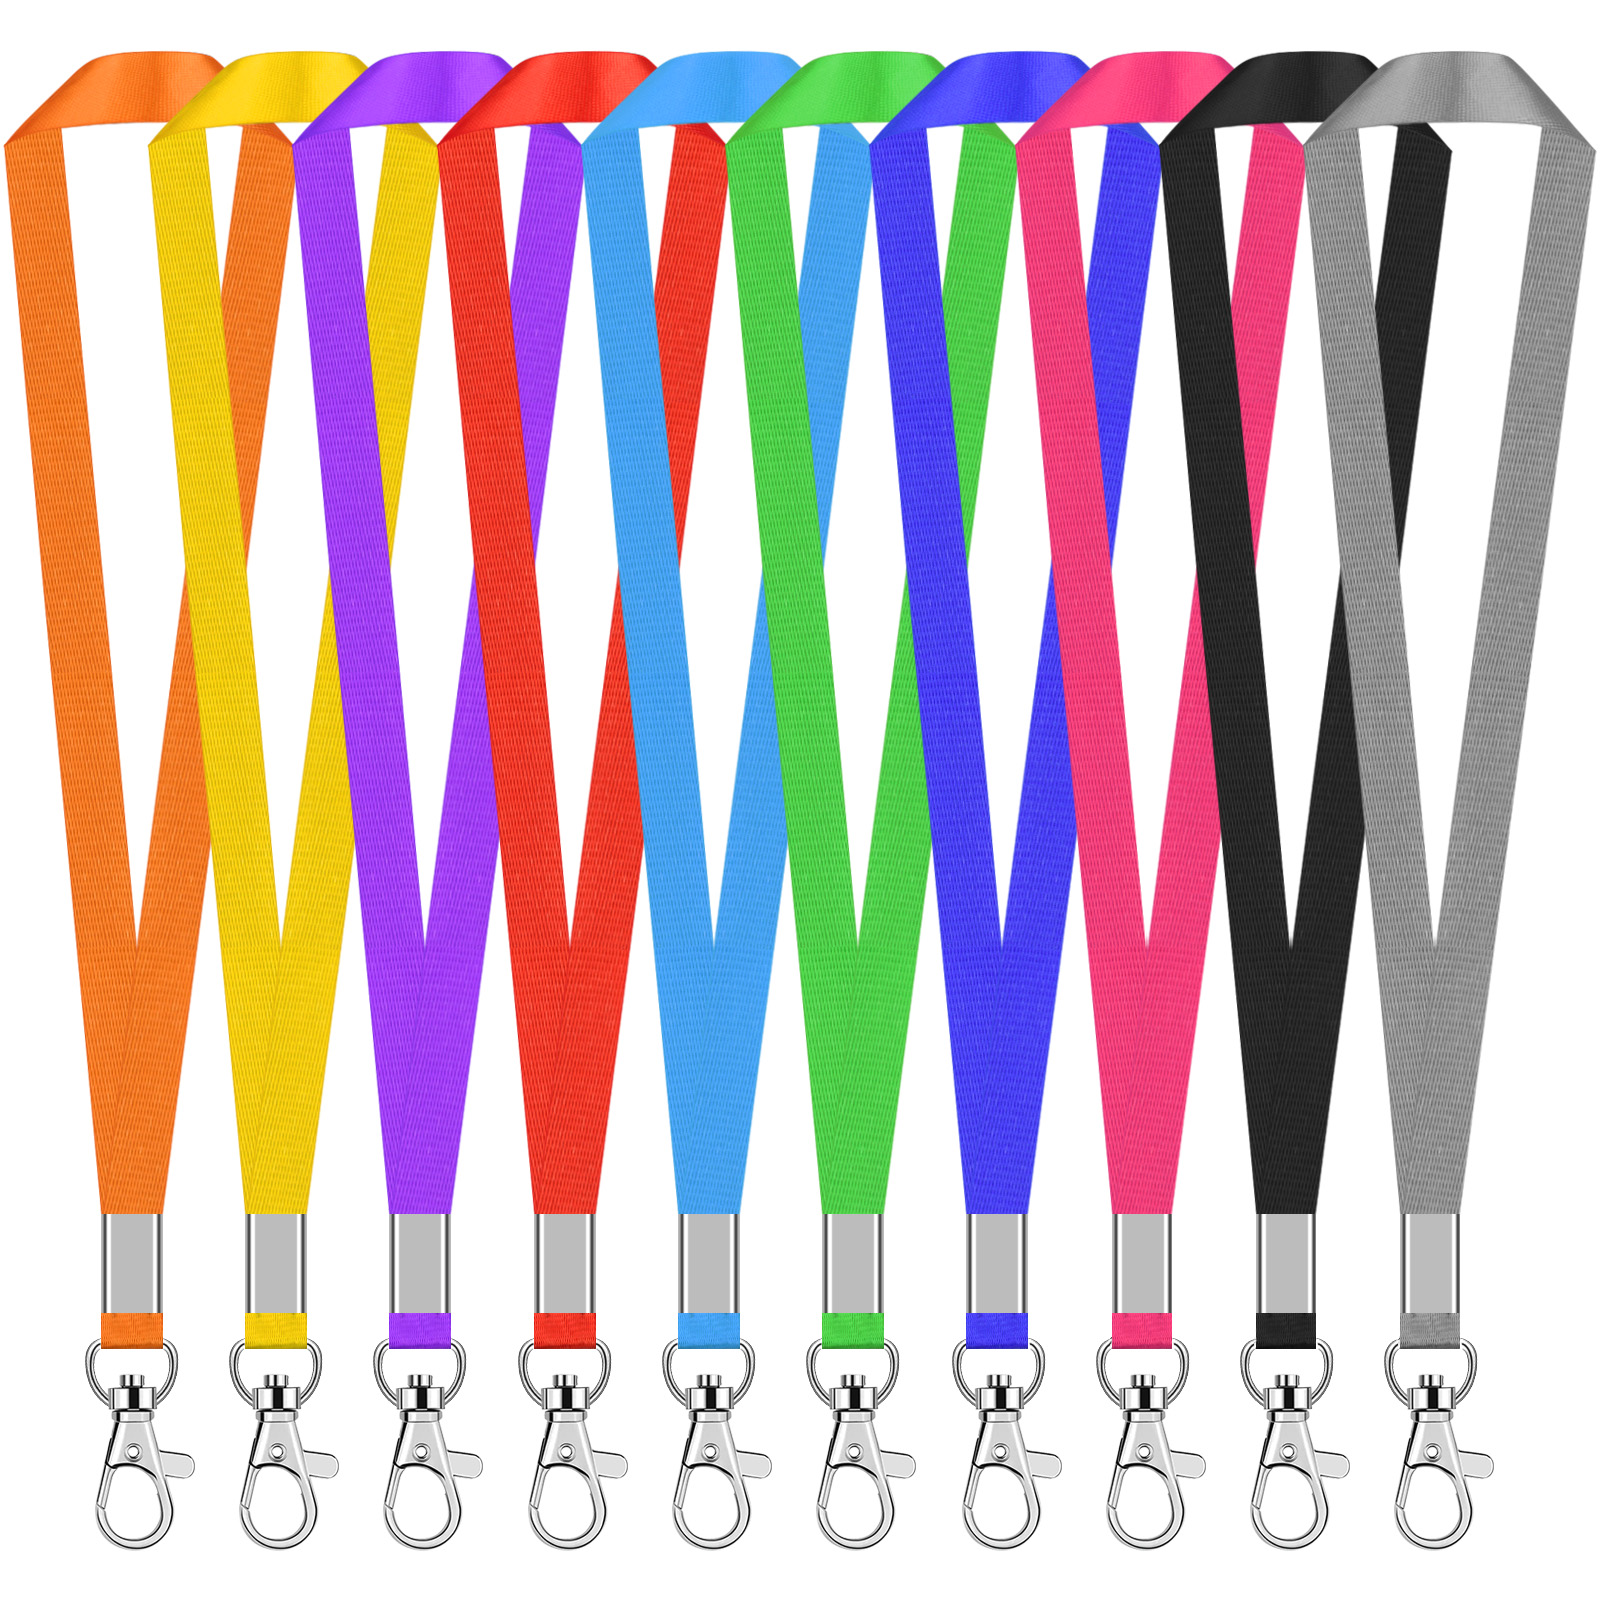 

10pcs 45cm Flat Neck Lanyards With Swivel Hook For Badge Reel Id Card Holders, Badge Lanyards For Id Name Badge Holder/name Tags